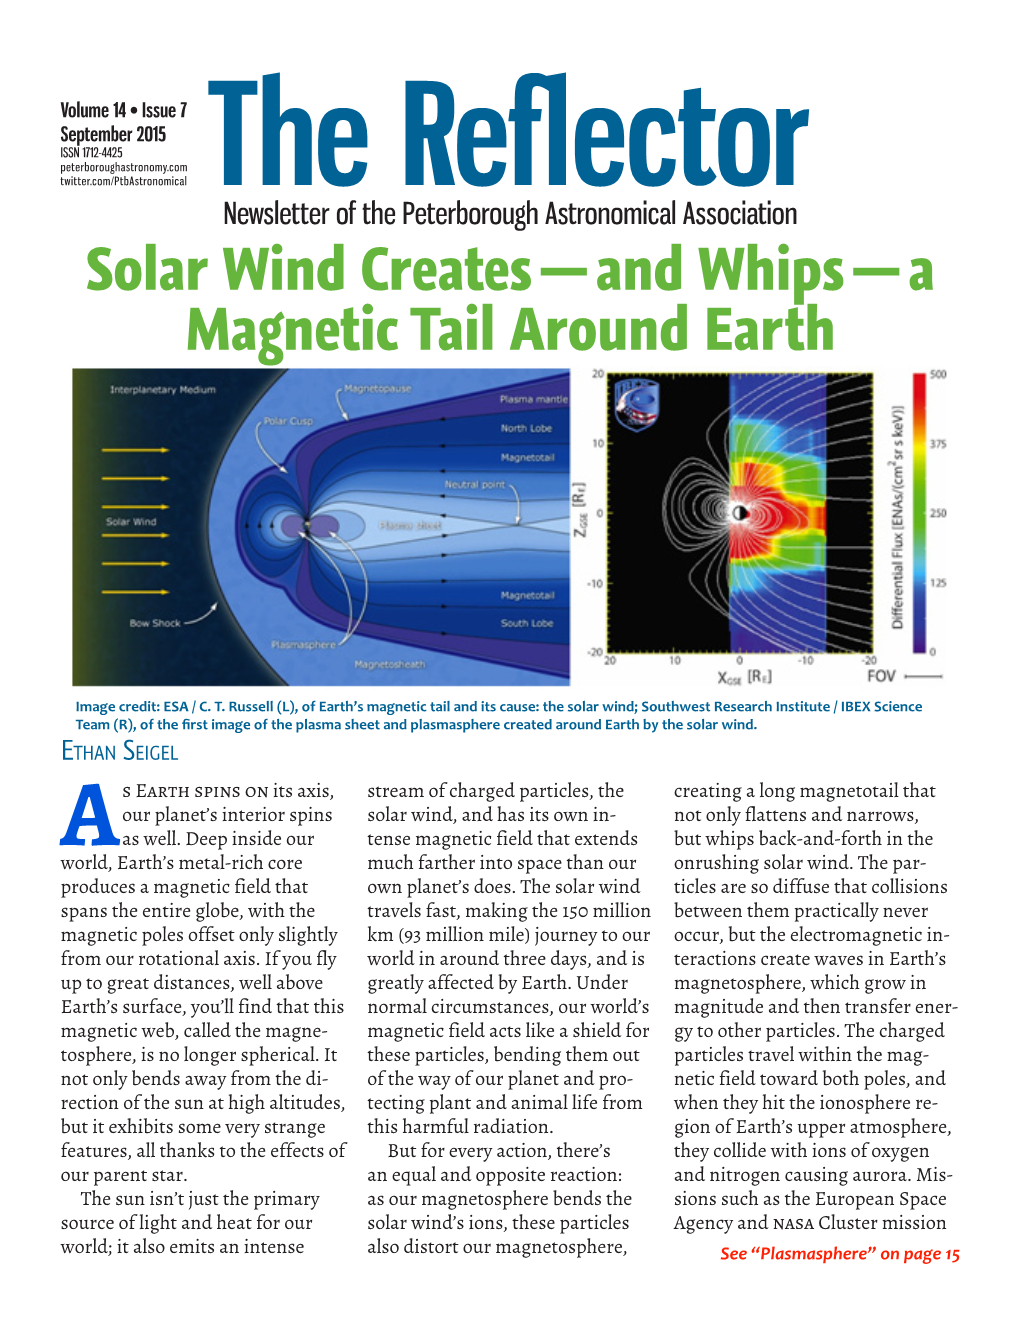 The Reflector Newsletter of the Peterborough Astronomical Association Solar Wind Creates — and Whips — a Magnetic Tail Around Earth